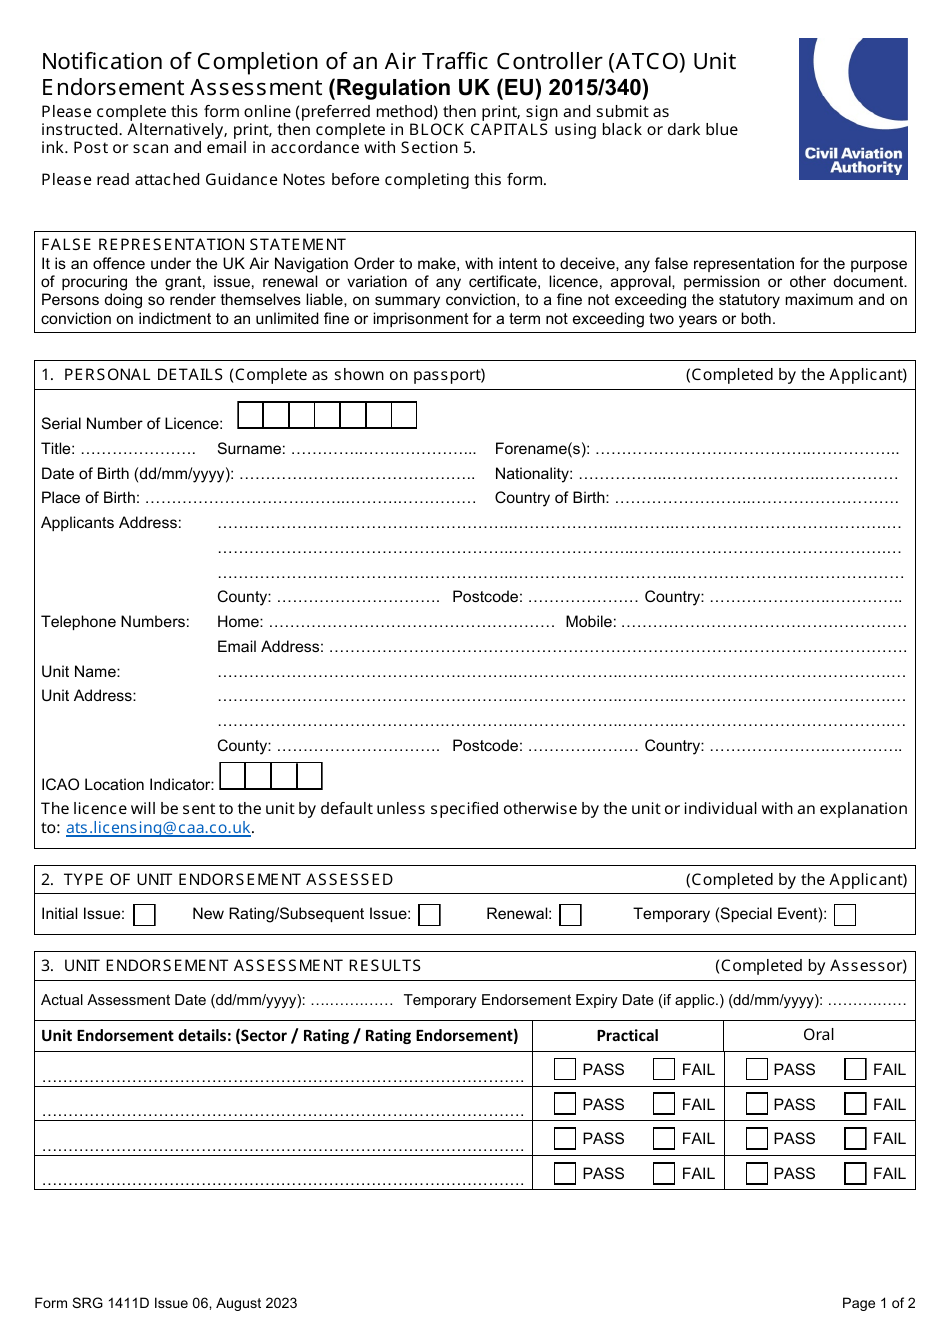 Form SRG1411D Notification of Completion of an Air Traffic Controller (Atco) Unit Endorsement Assessment (Regulation UK (Eu) 2015 / 340) - United Kingdom, Page 1